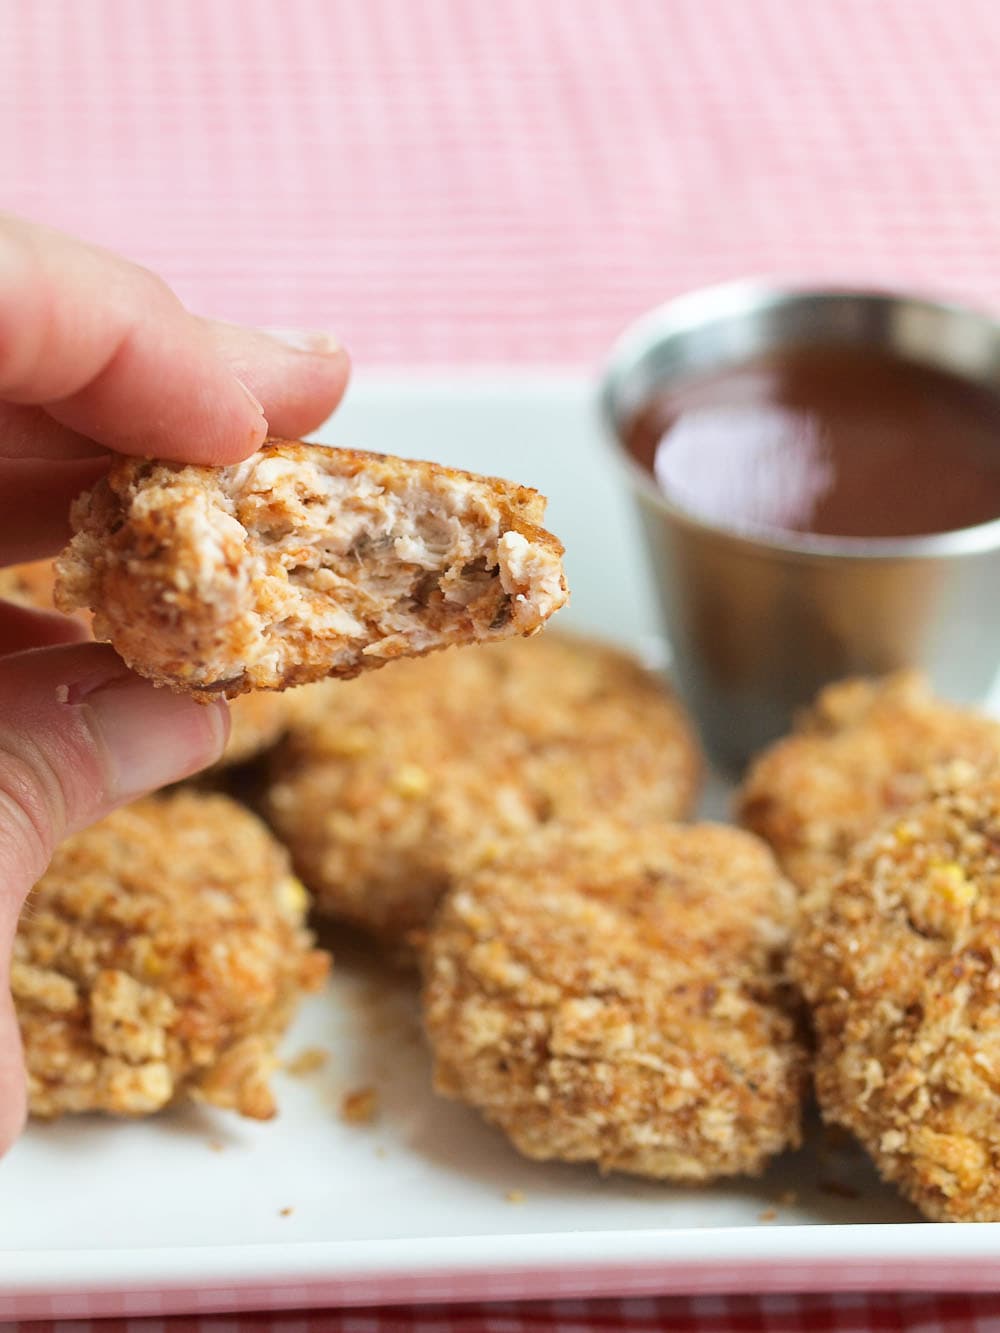 Homemade Baked Chicken Nuggets